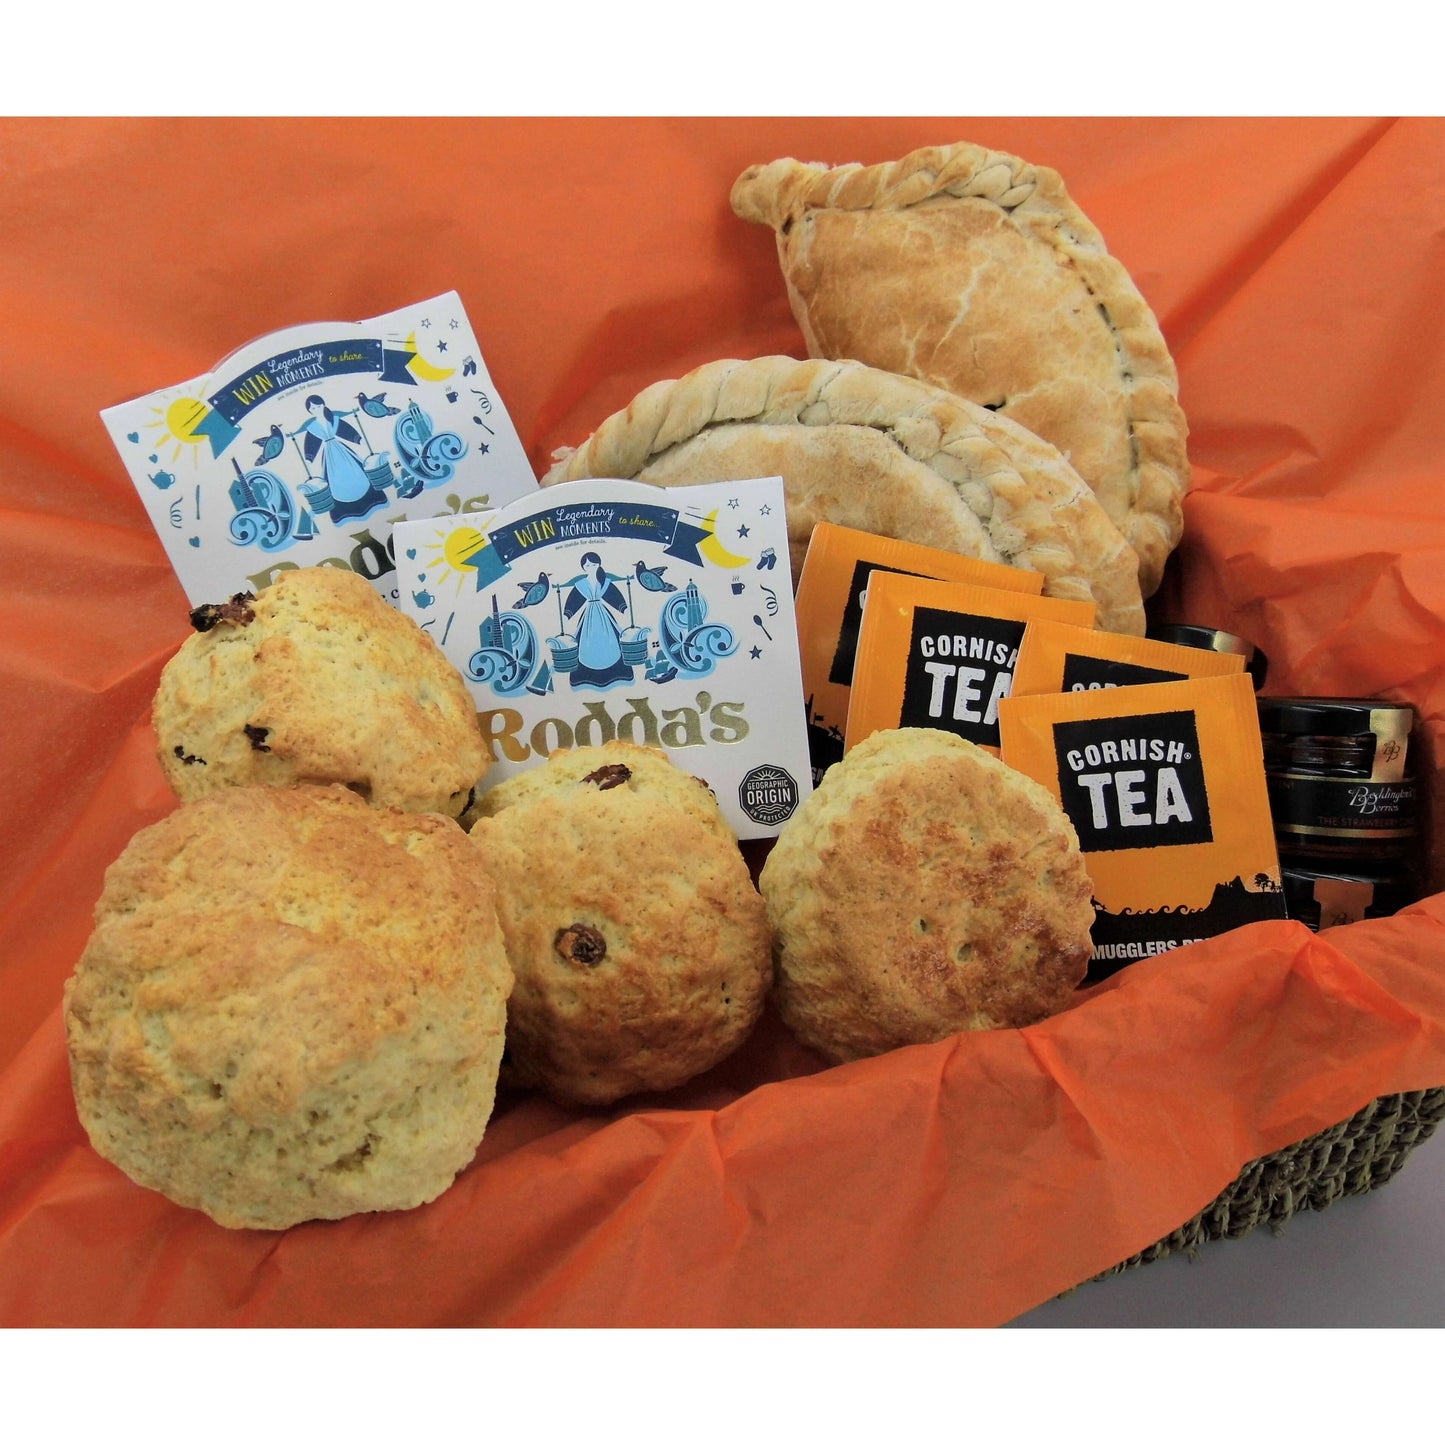 'Proper Job' hamper for two - Cornish cream tea for 2 with freshly baked scones and 2 Cornish pastys in a seagrass hamper basket